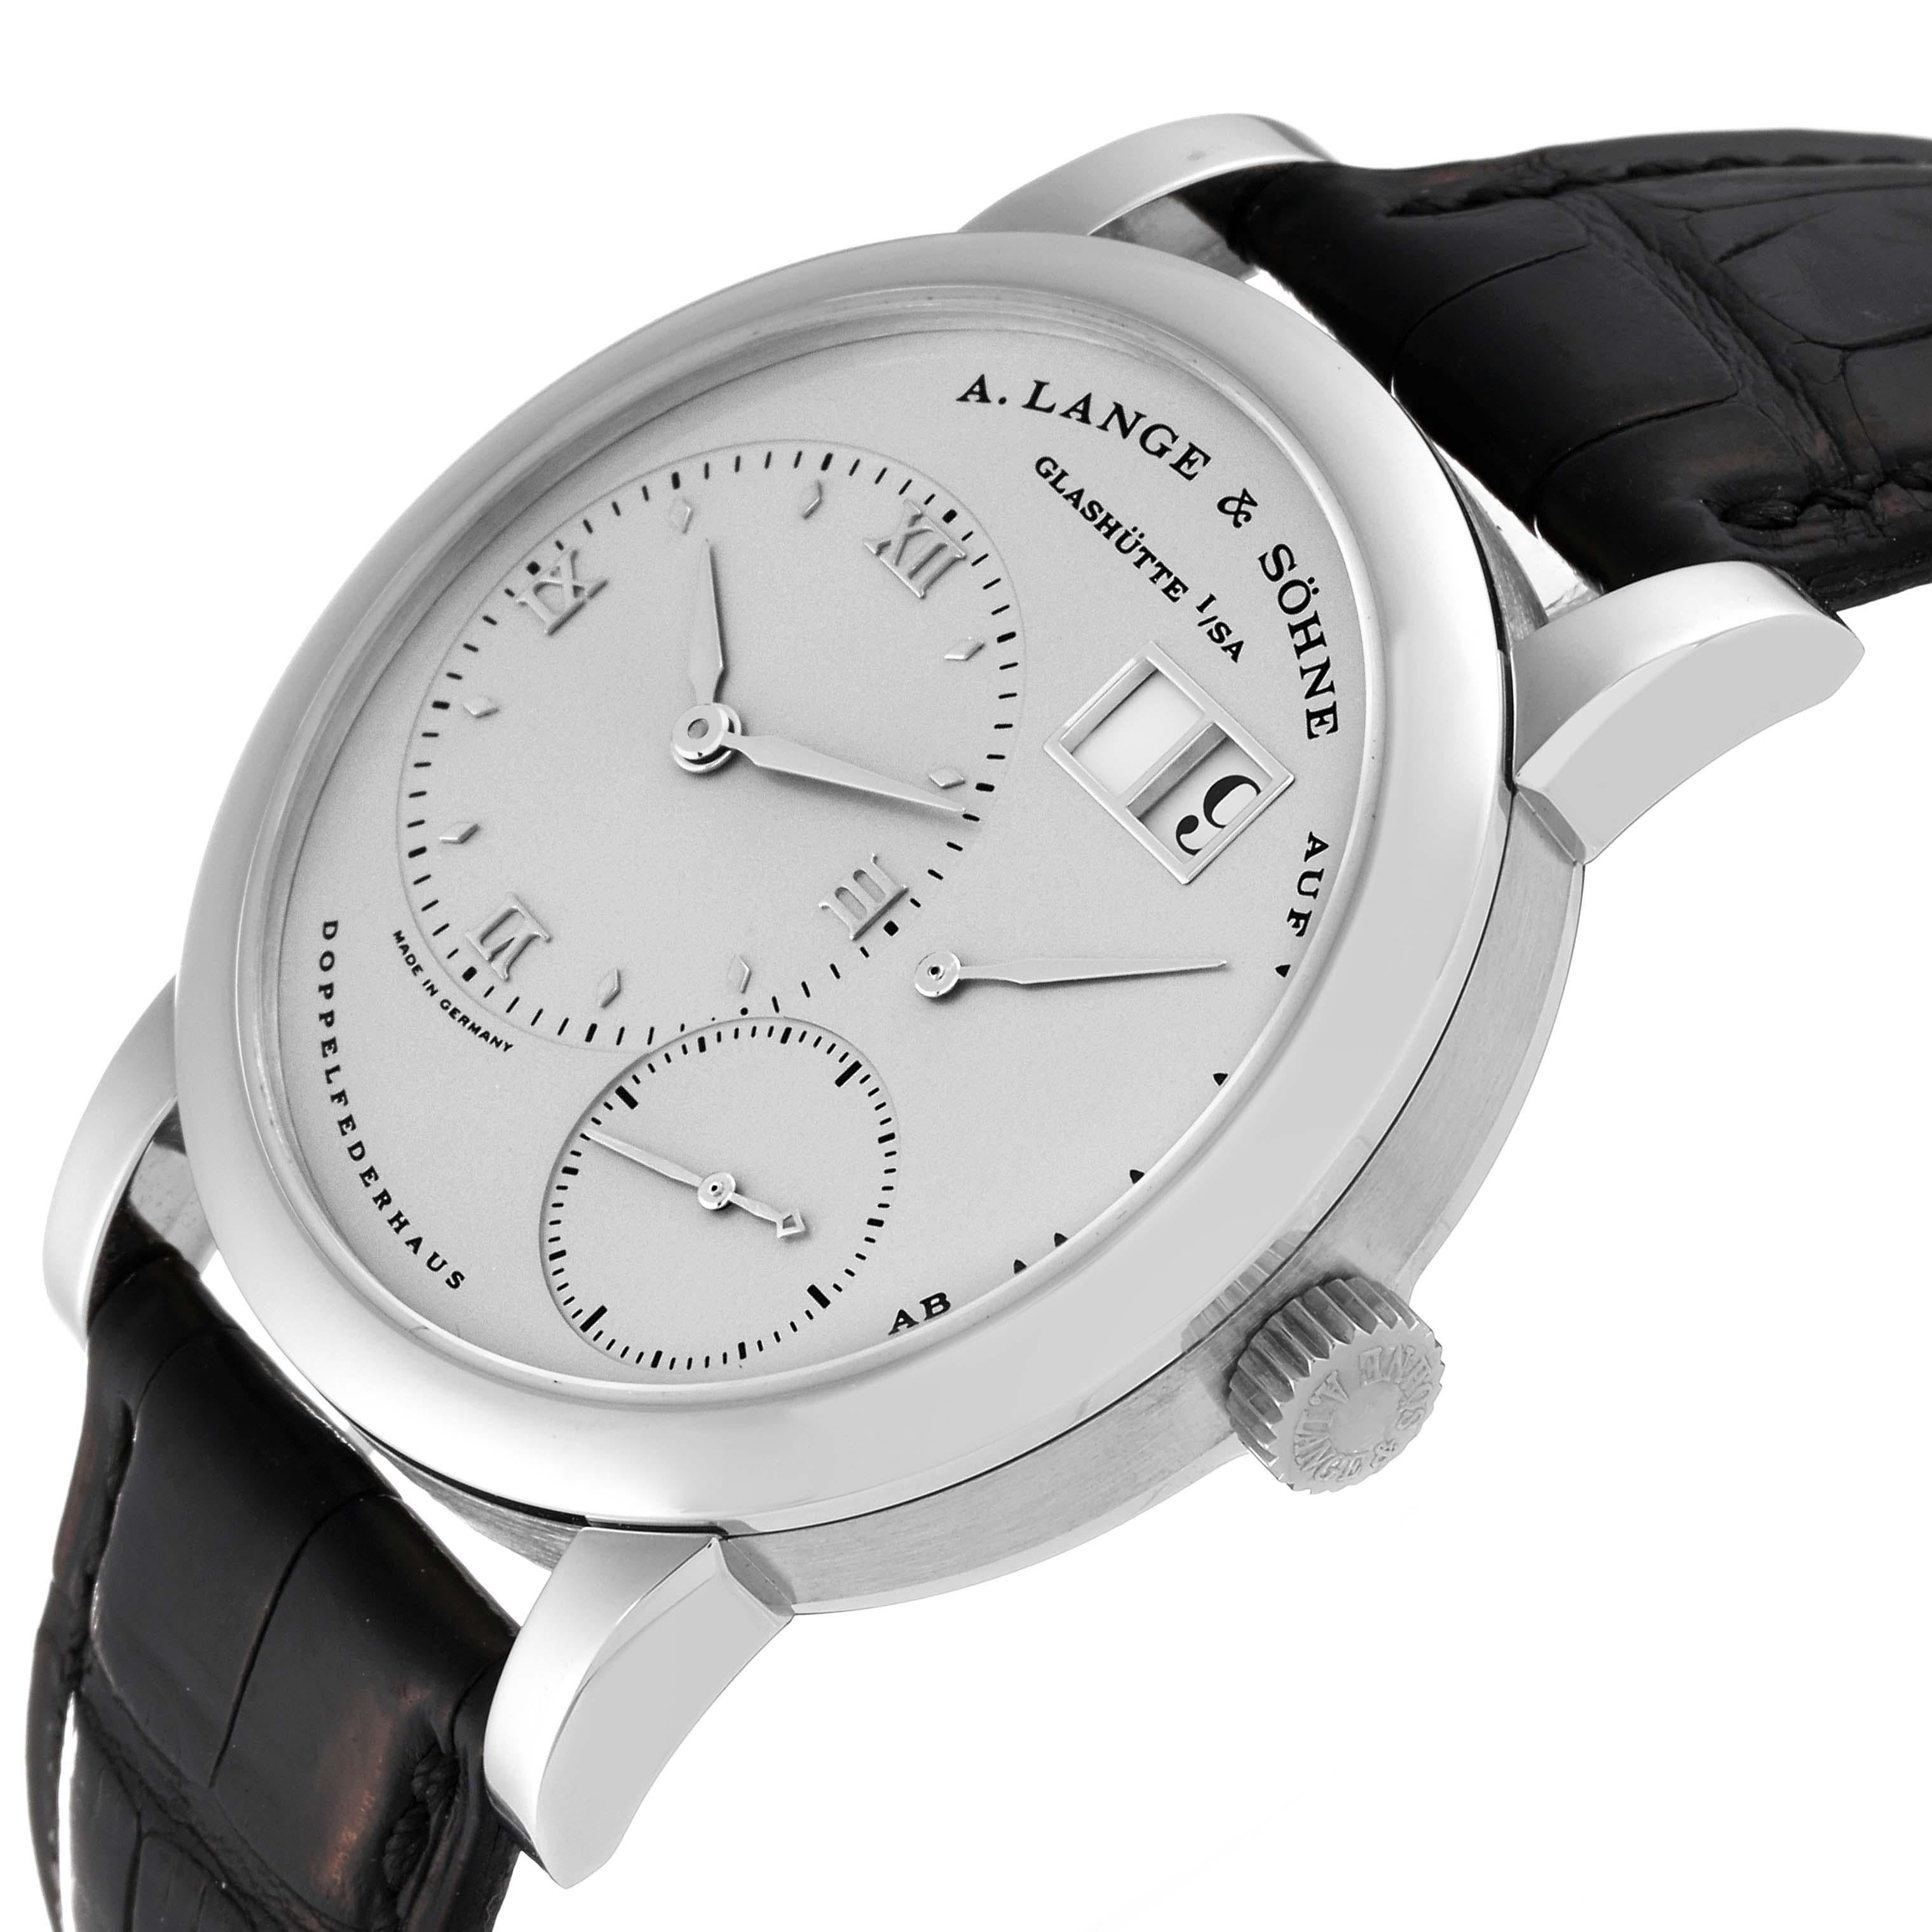 A. Lange and Sohne Lange 1 Silver Dial Platinum Mens Watch 101.025 In Excellent Condition For Sale In Atlanta, GA